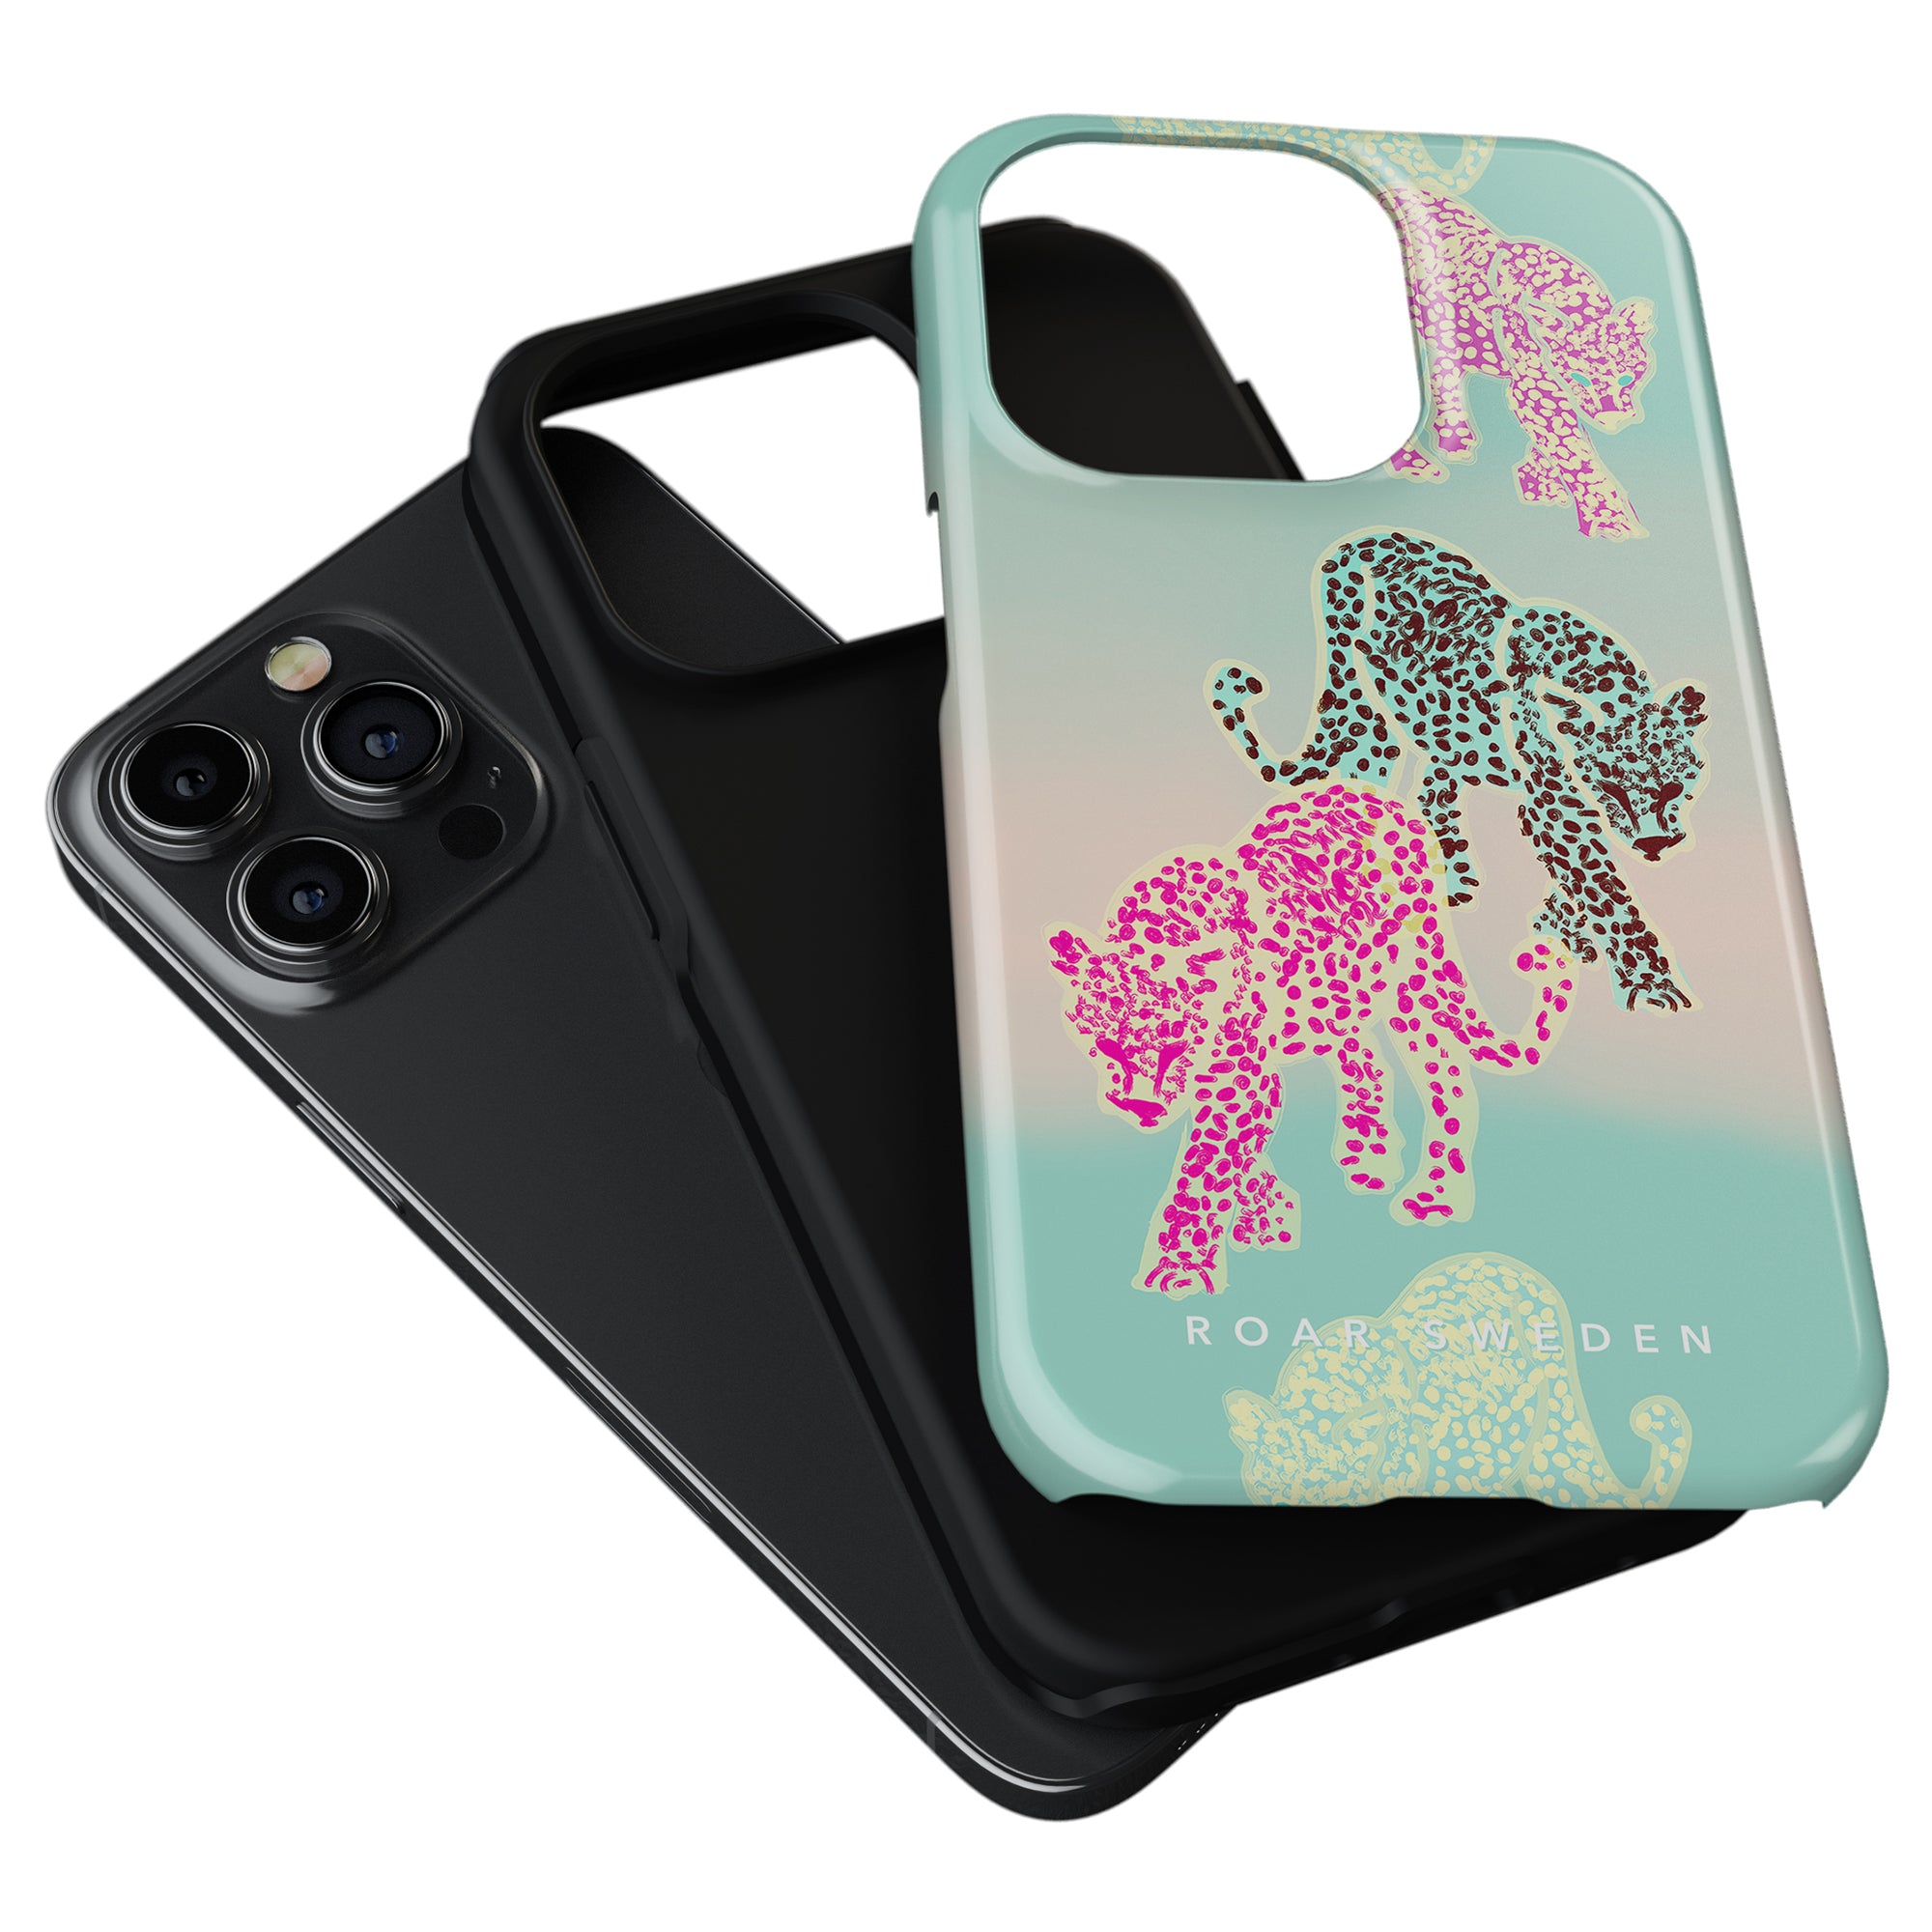 The Tame - Tough Case features a modern design with a pink and blue color scheme. With its robust construction, the Tame - Tough Case provides effective protection for your mobile device.